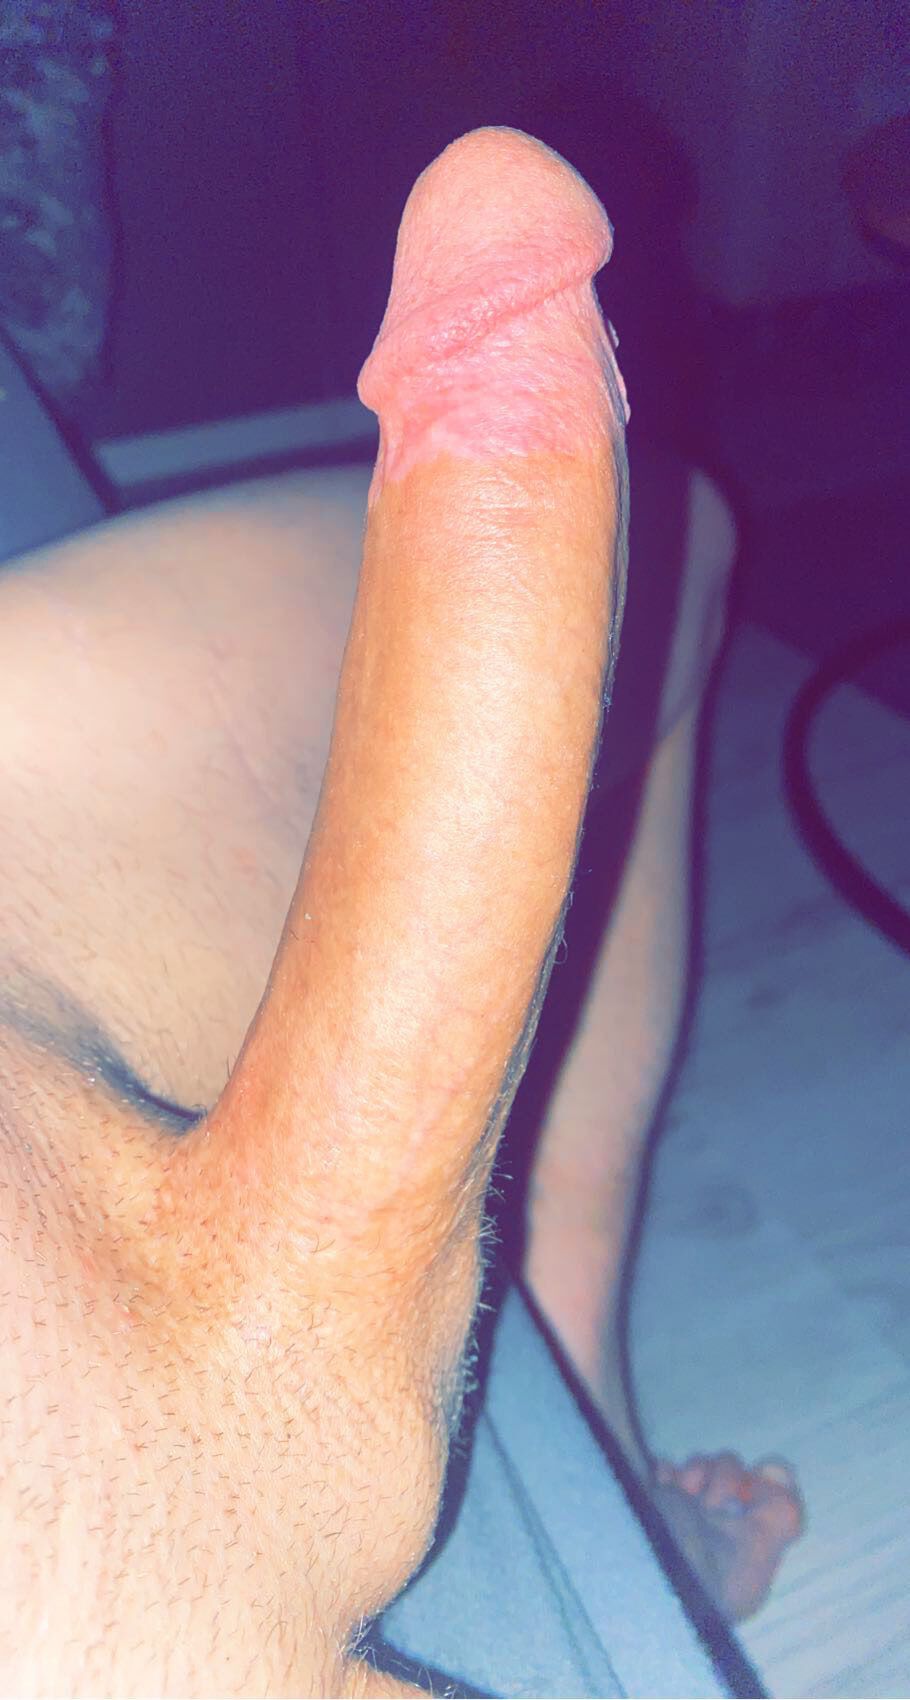 my cock #10